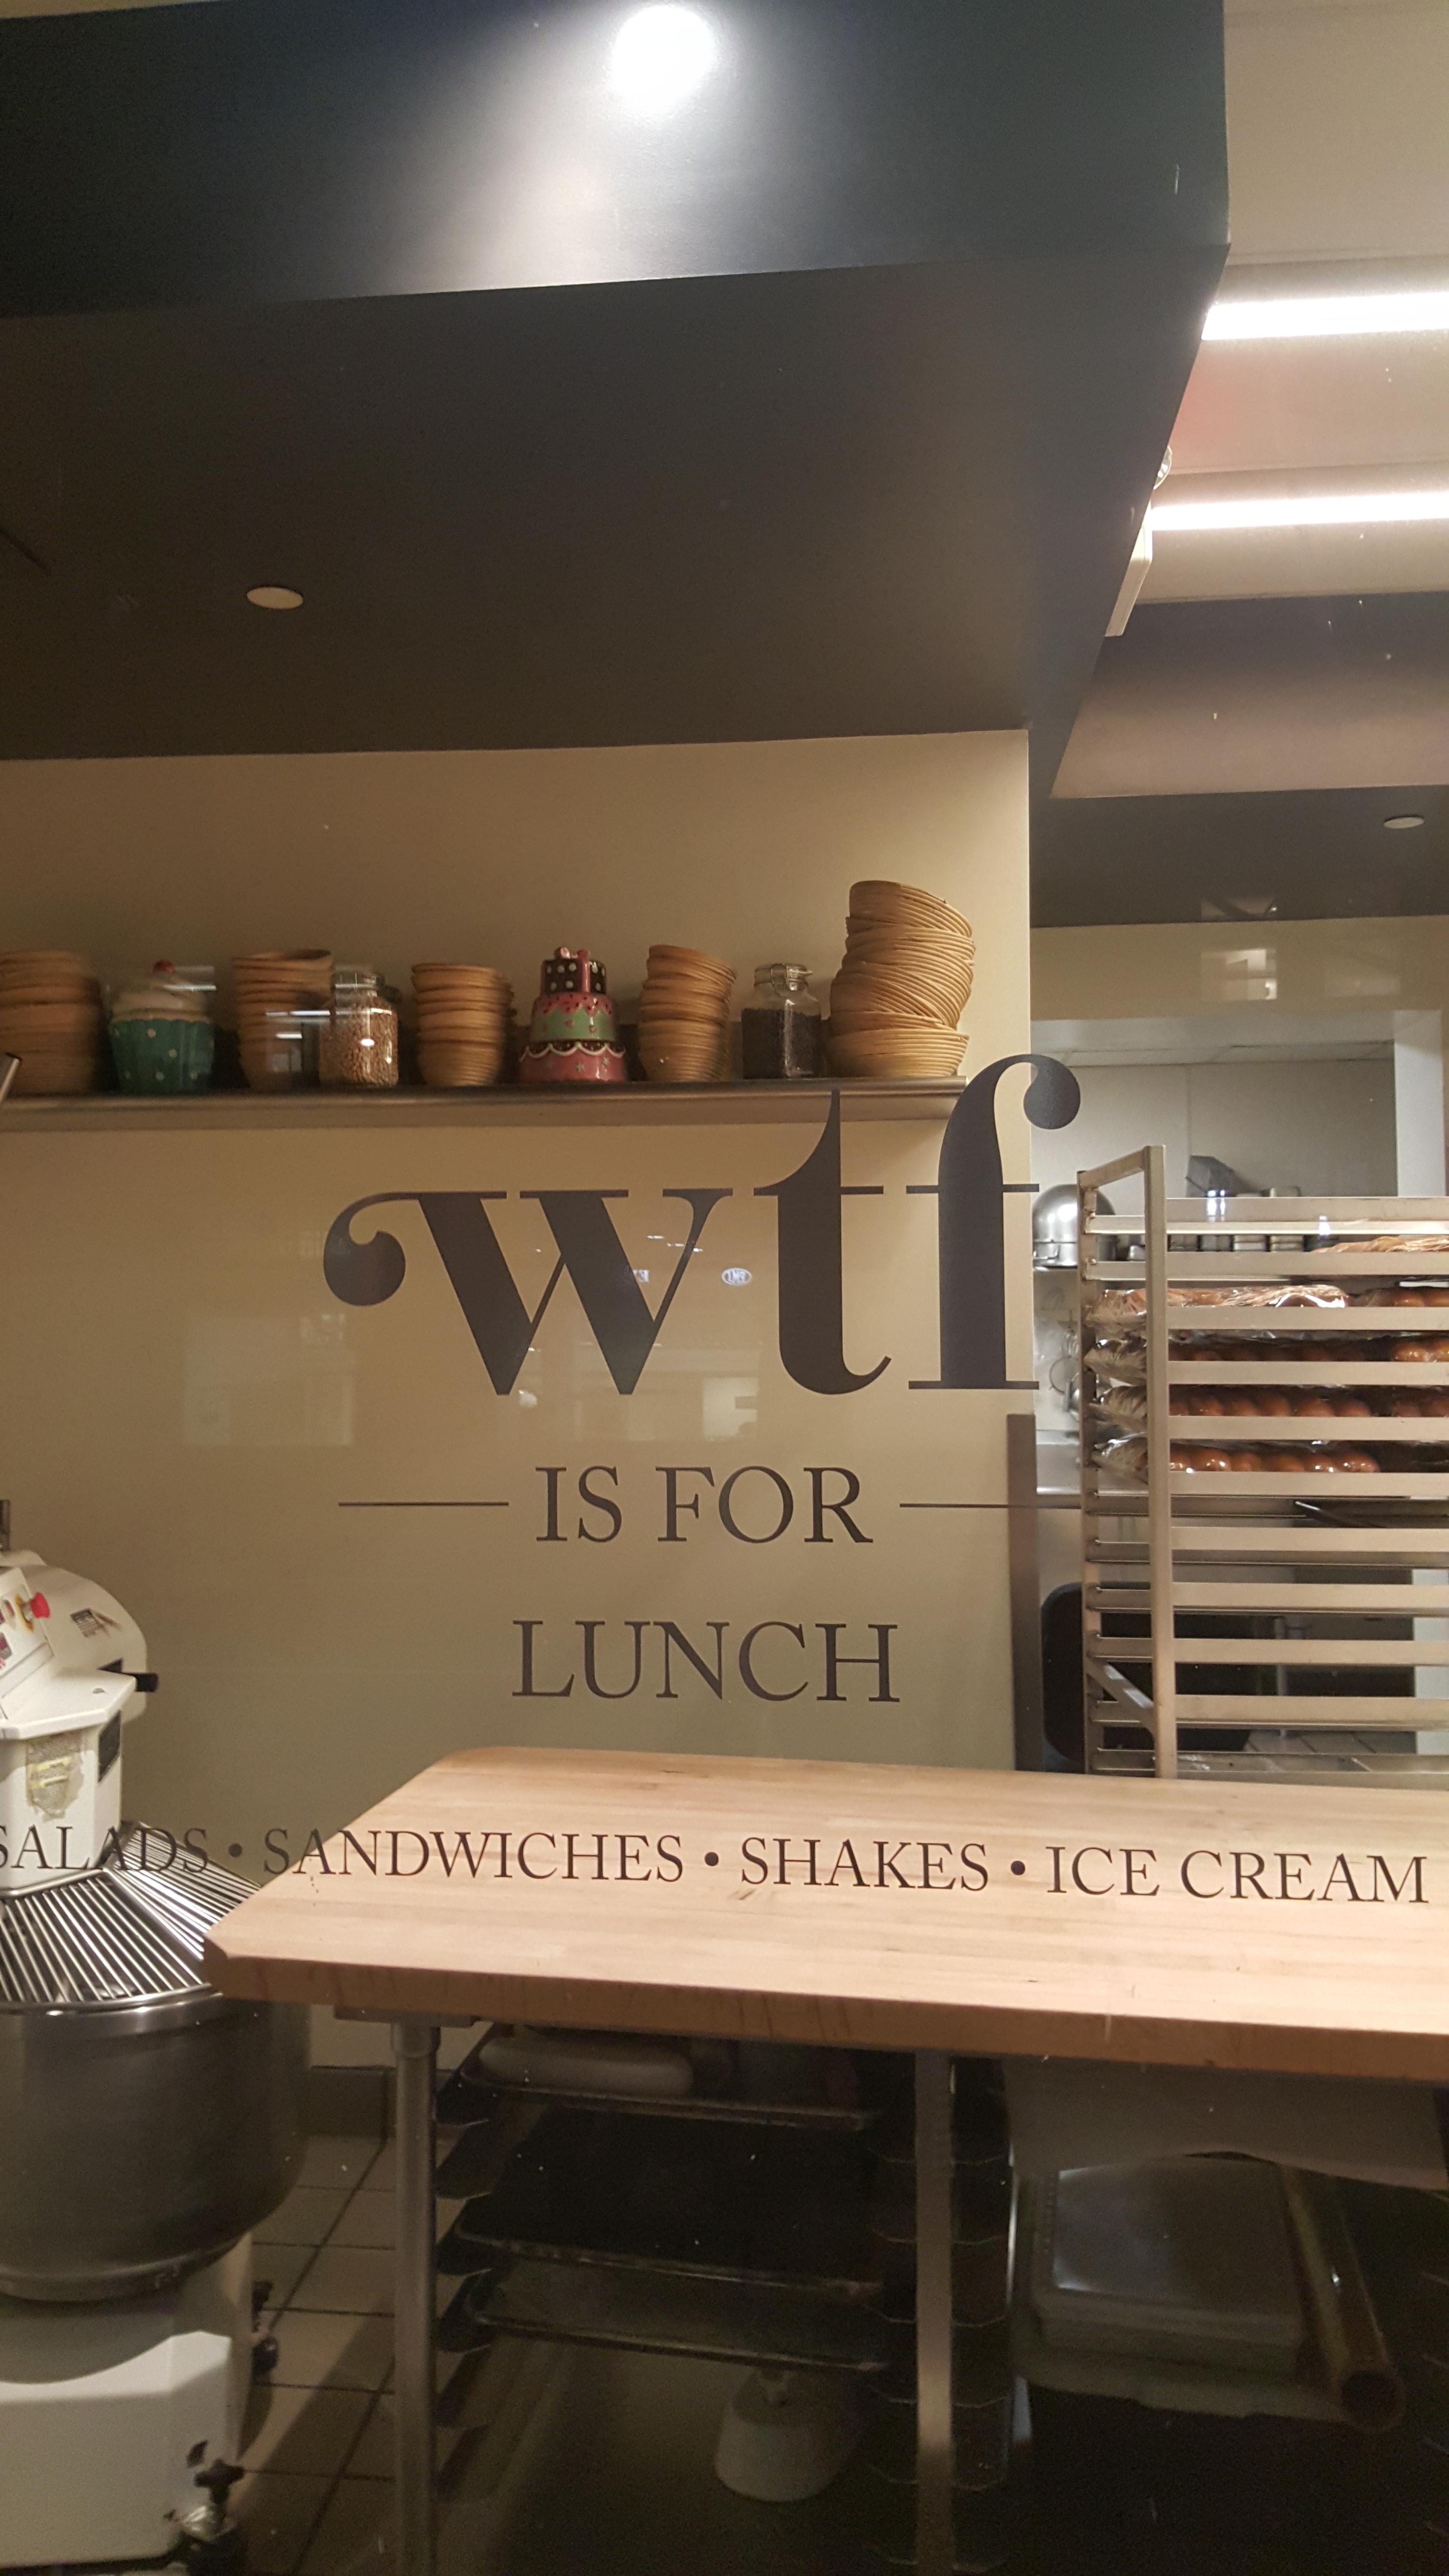 interior design - Wtr Is For Lunch Lads Sandwiches.Shakes. Ice Cream